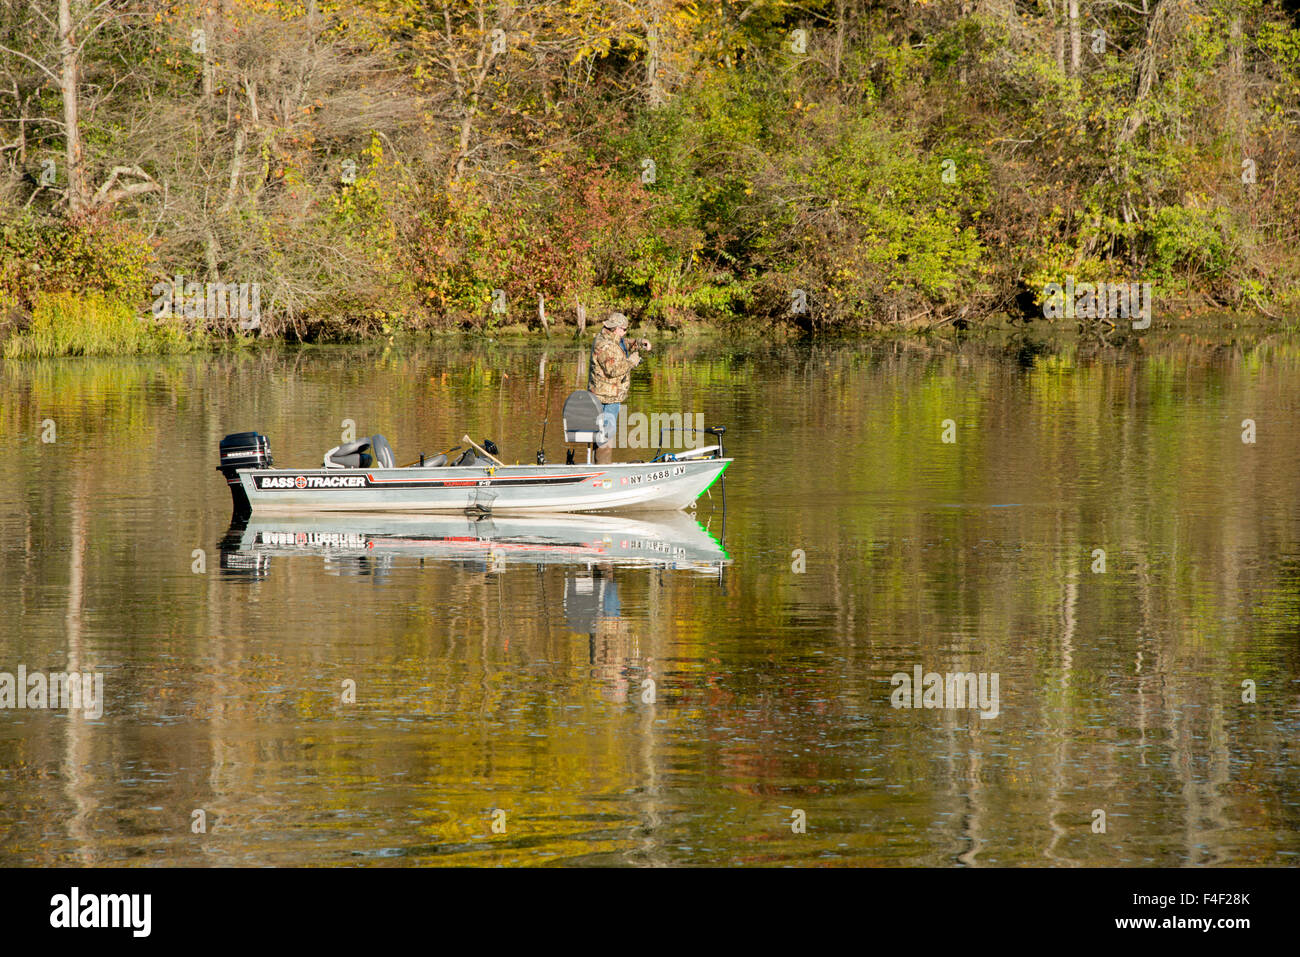 New York, Erie Canal. Autumn fishing on the Erie Canal. (Large format sizes available) Stock Photo